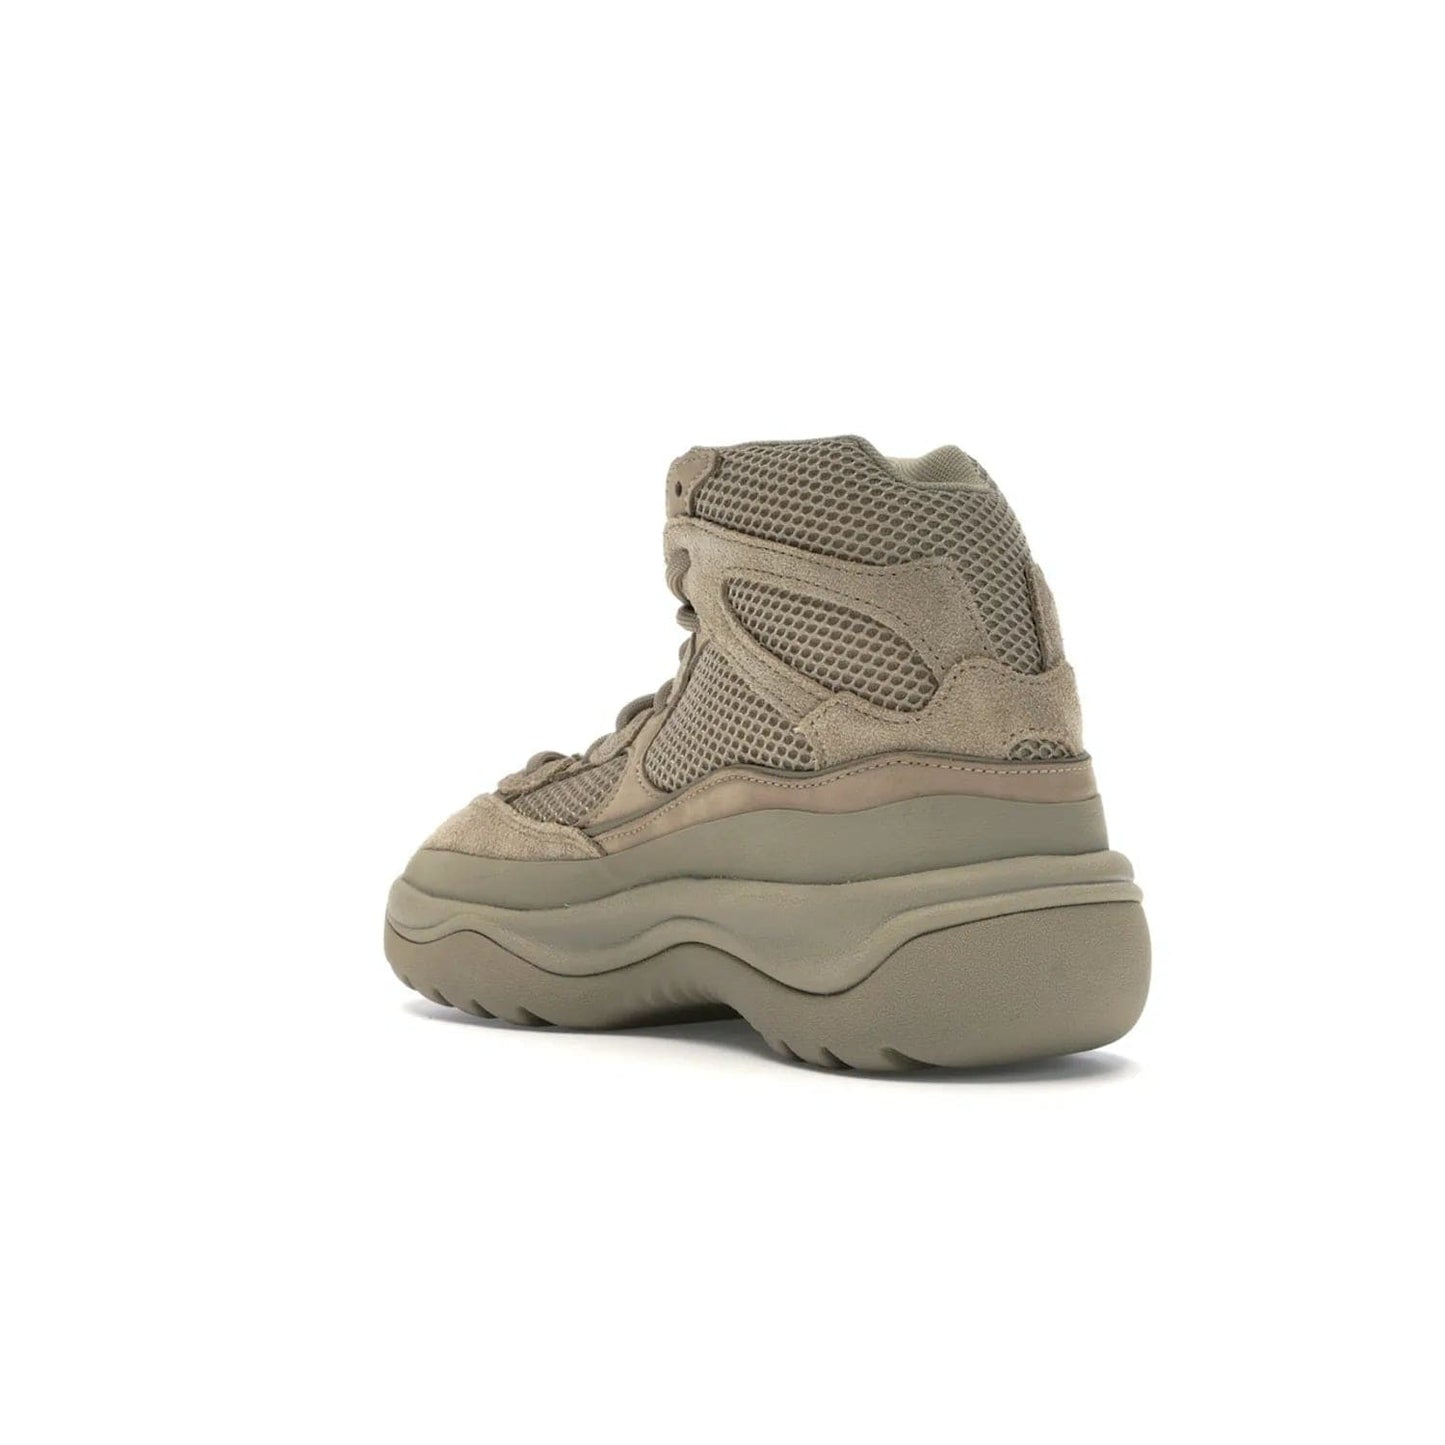 adidas Yeezy Desert Boot Rock - Image 24 - Only at www.BallersClubKickz.com - #
This season, make a fashion statement with the adidas Yeezy Desert Boot Rock. Nubuck and suede upper offers tonal style while the grooved sole provides traction and stability. Get yours in April 2019.